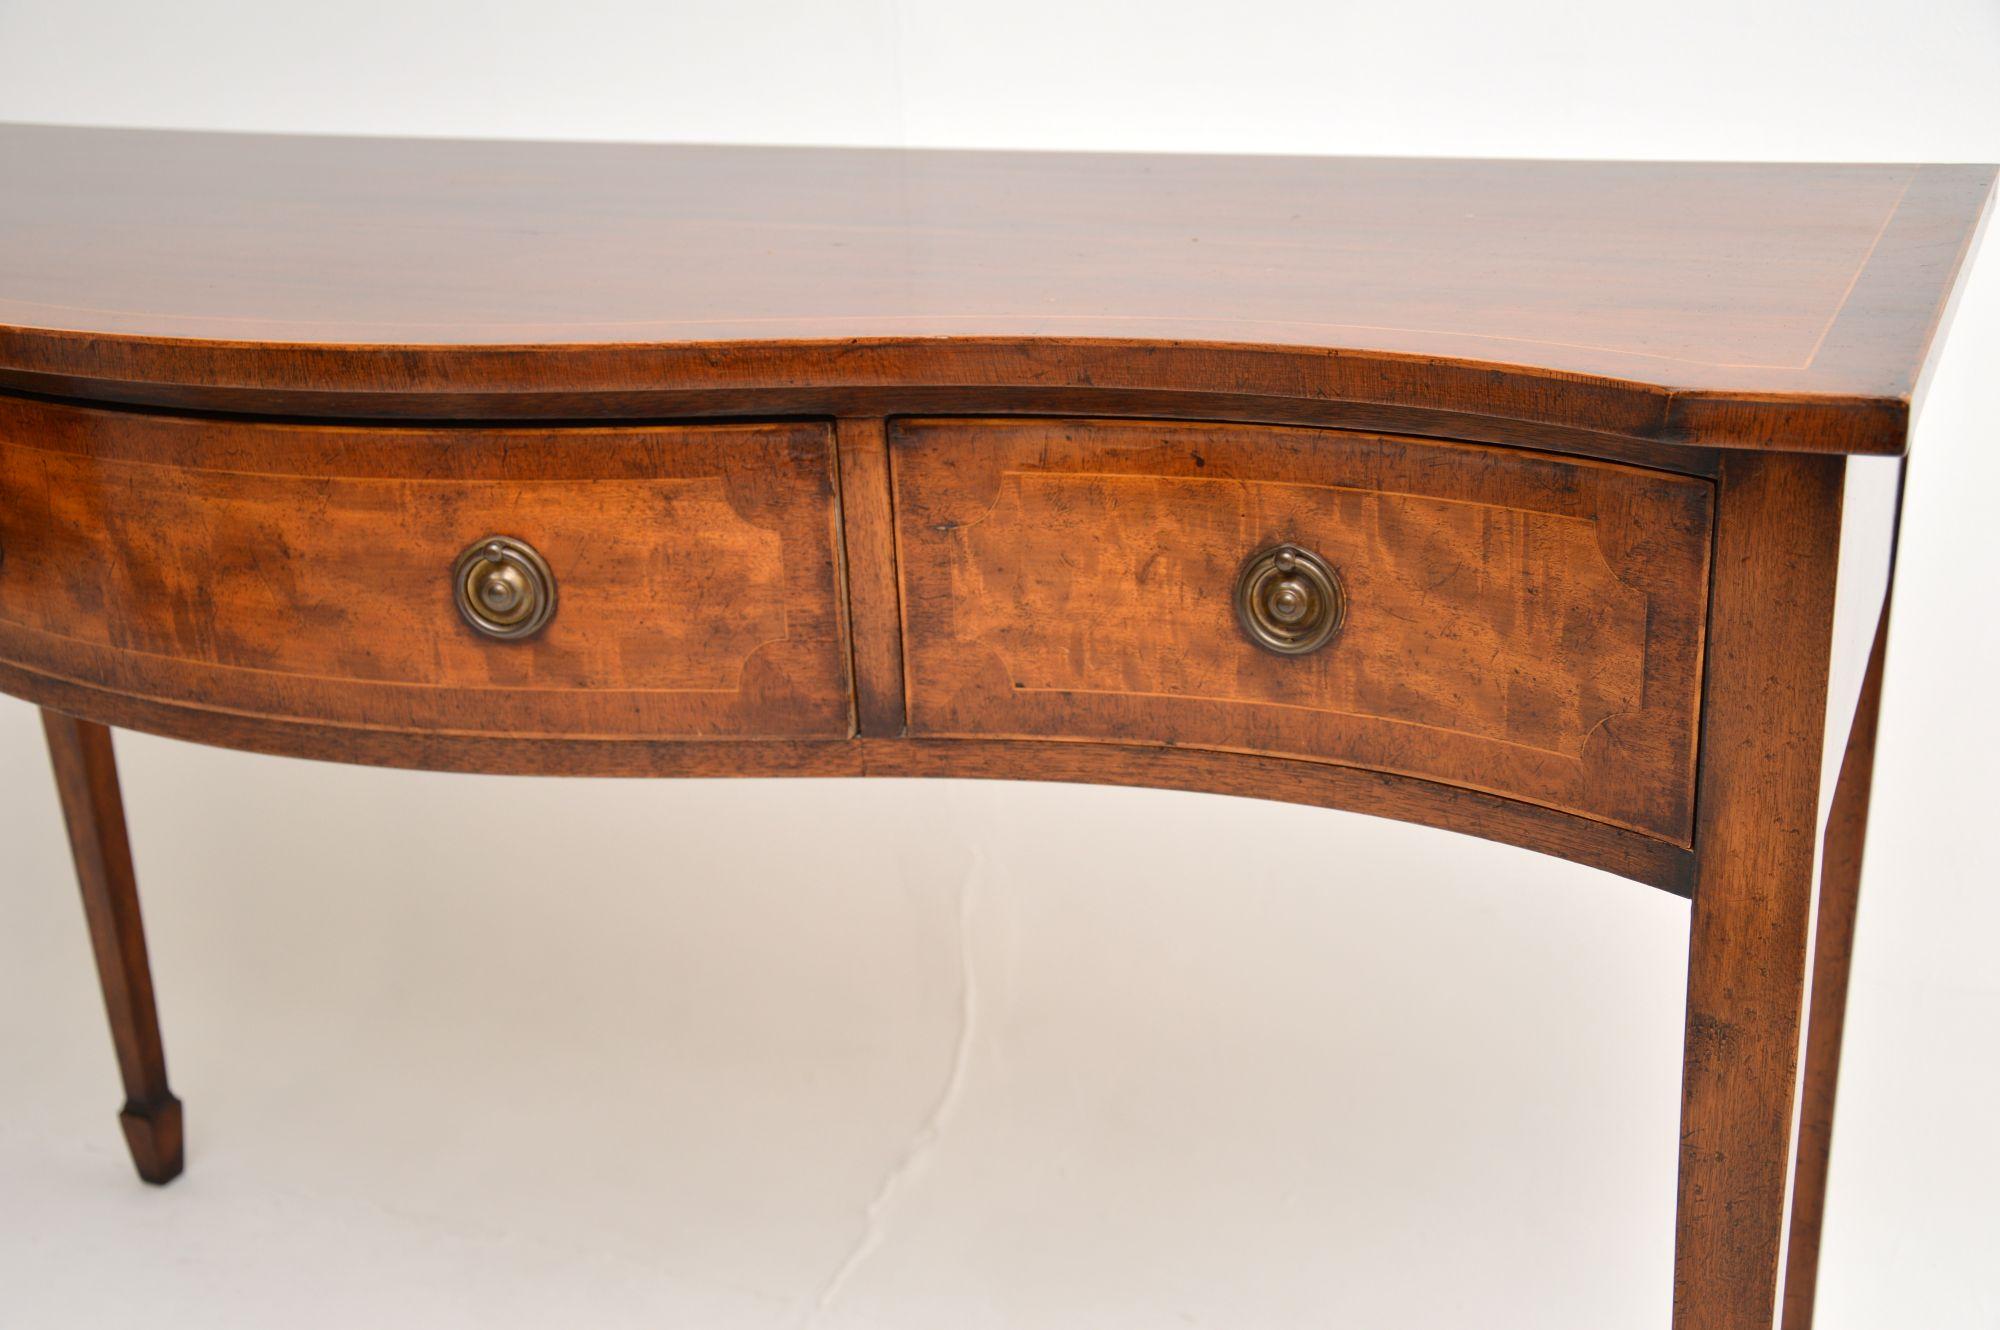 Wood Antique Sheraton Style Inlaid Console Table